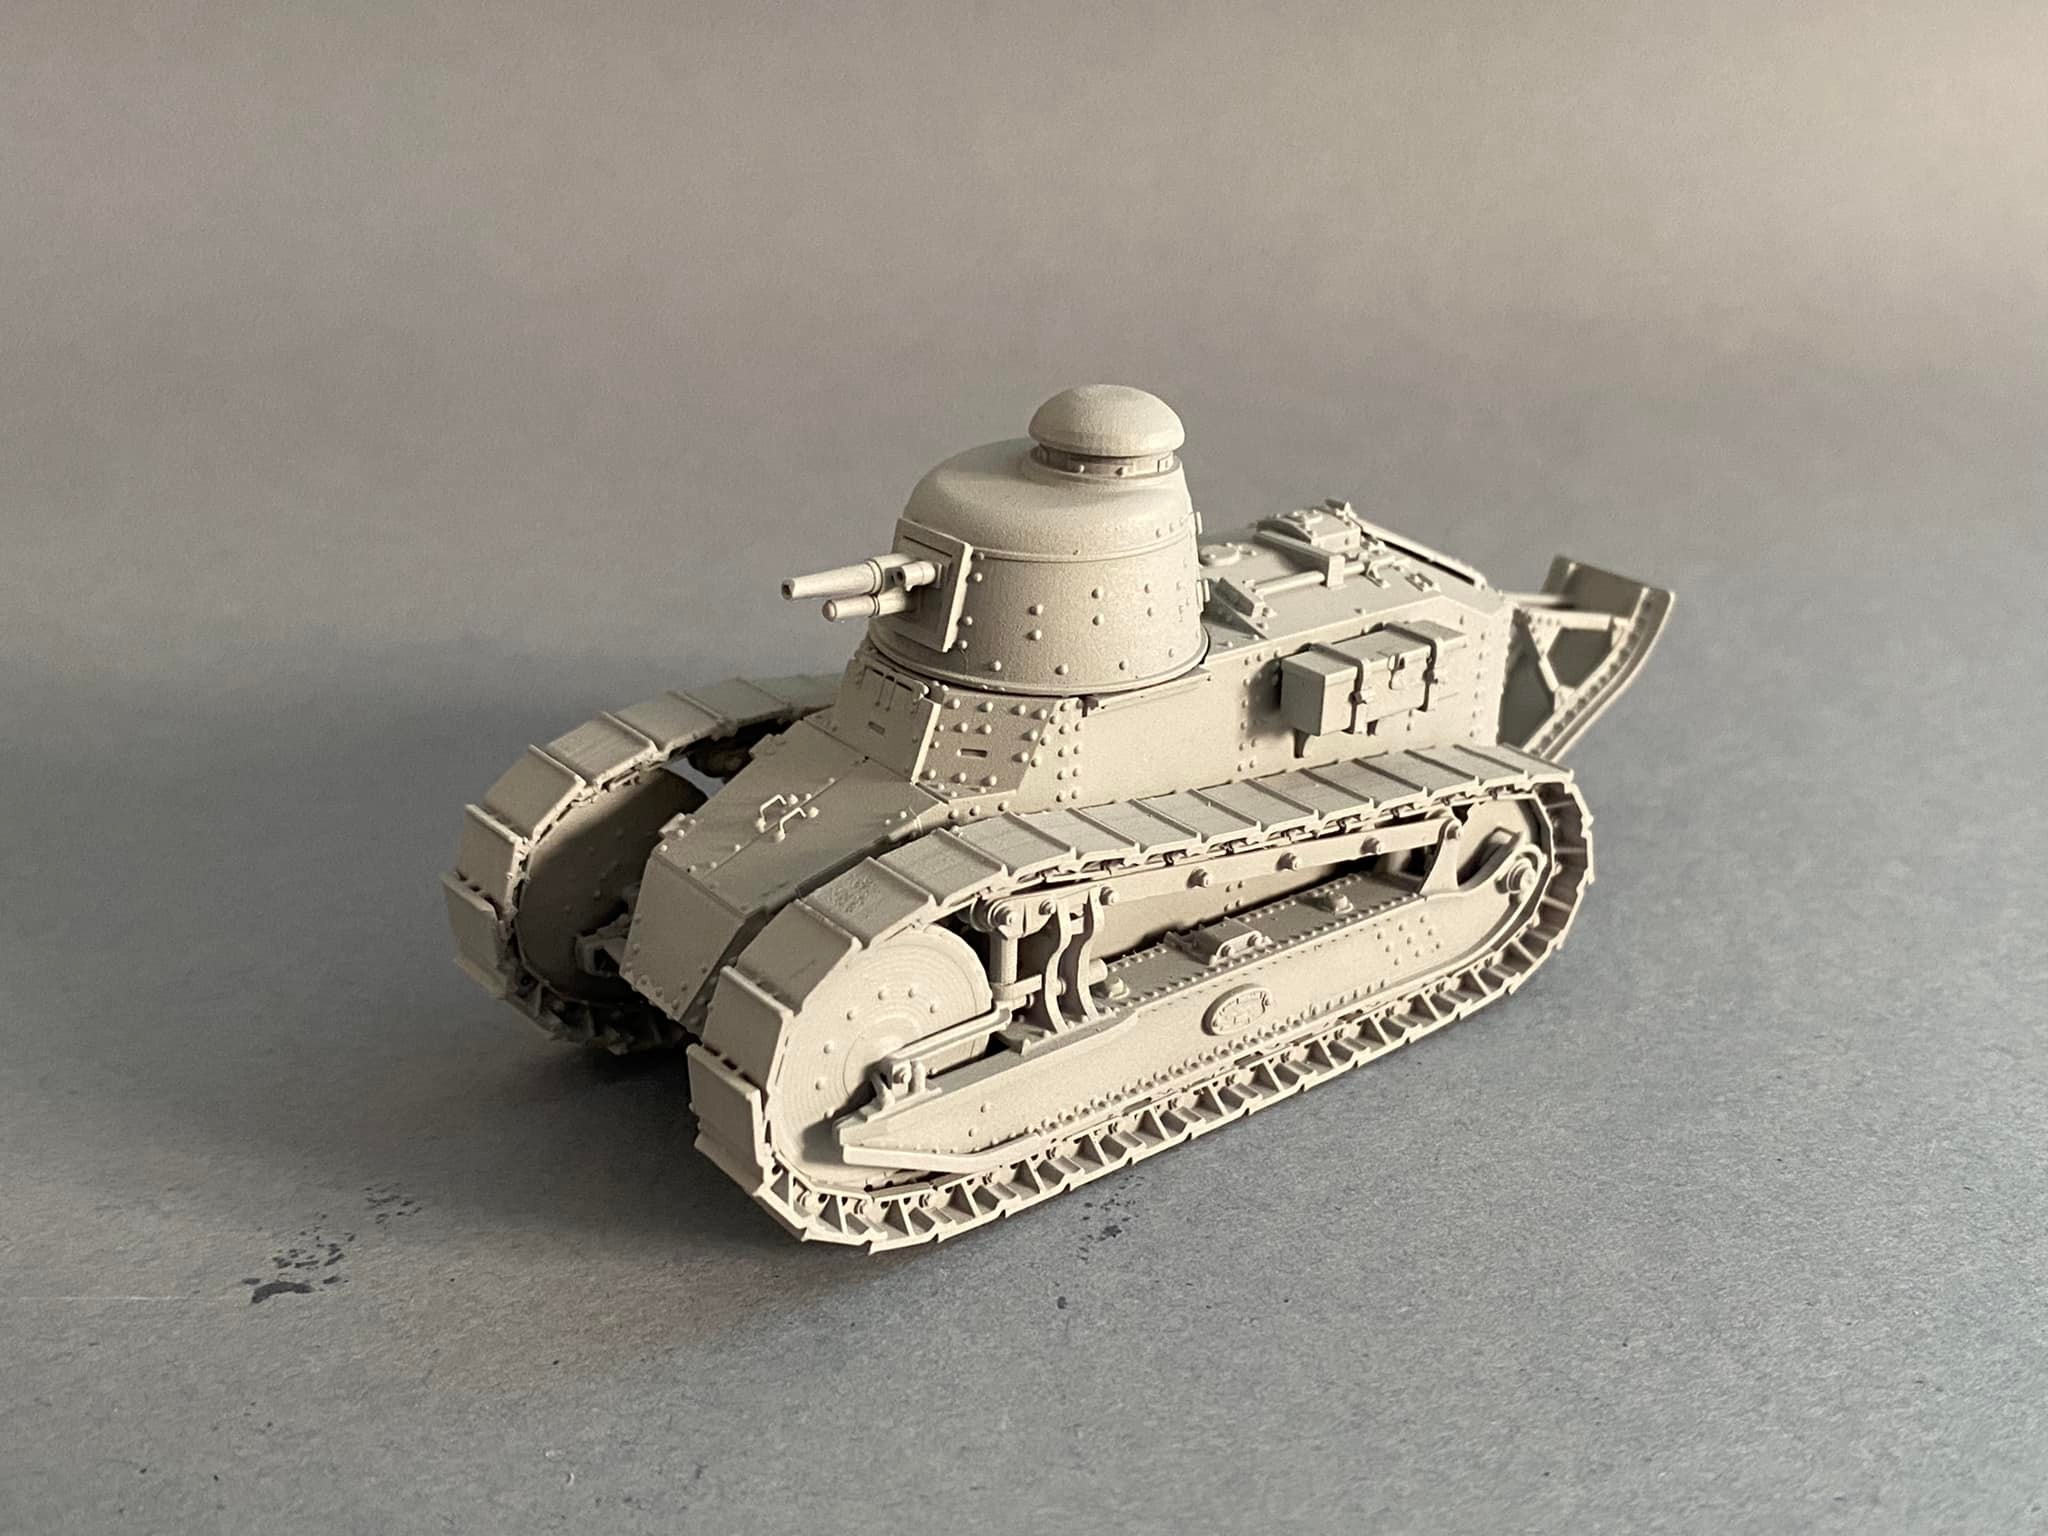 F&A Miniatures - Renault FT-17 - 1/48 scale